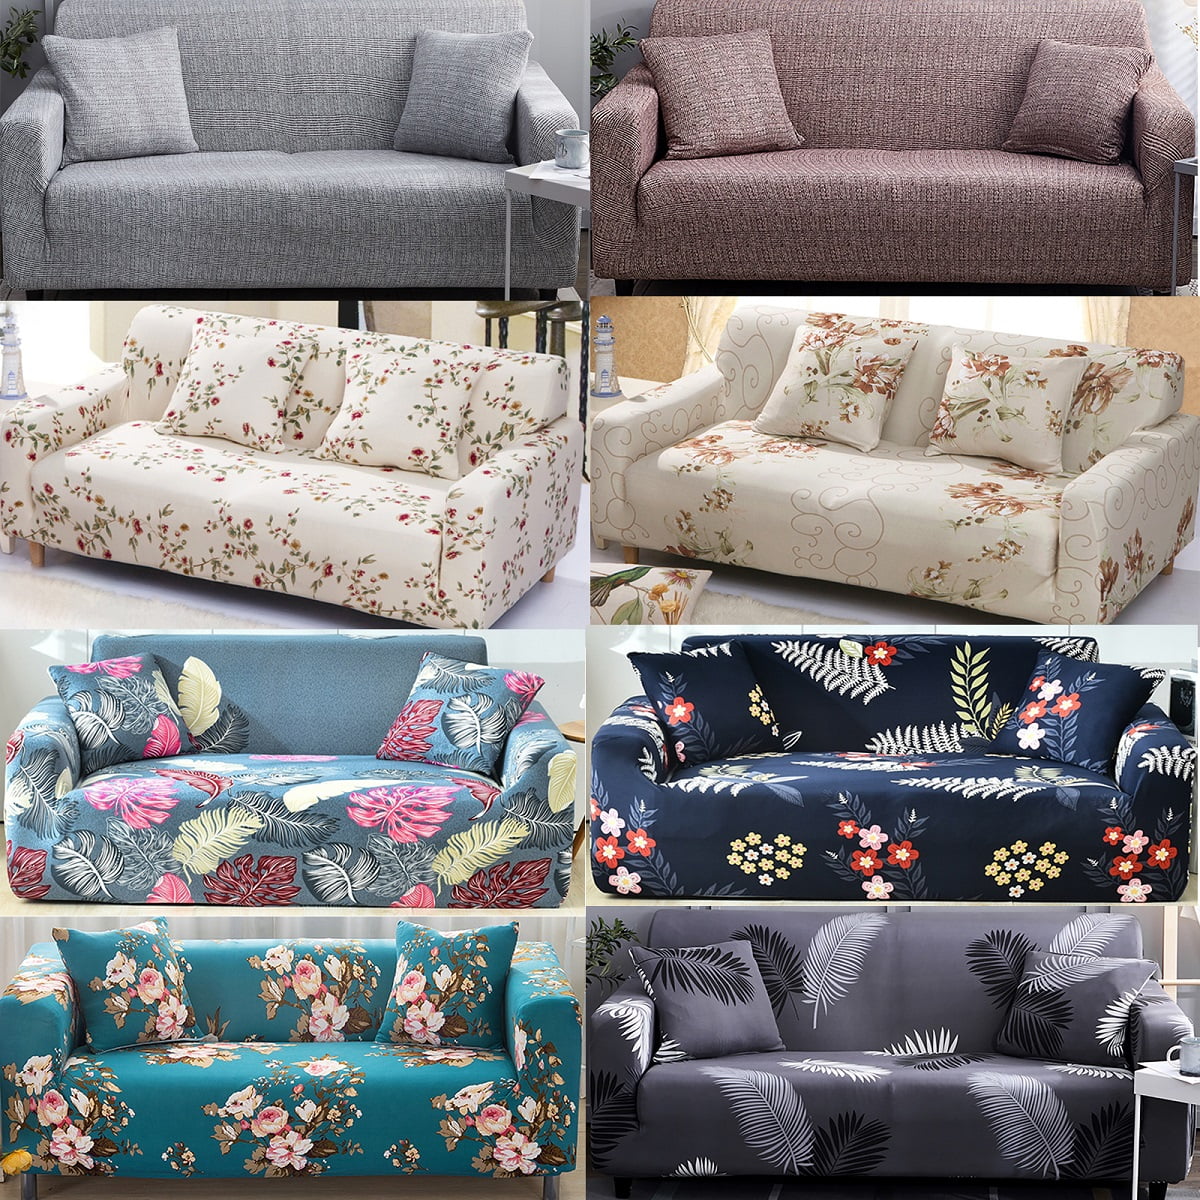 Floral Printed Removable Stretch Lounge Cover Sofa Bed Cover Slipcover Protector 